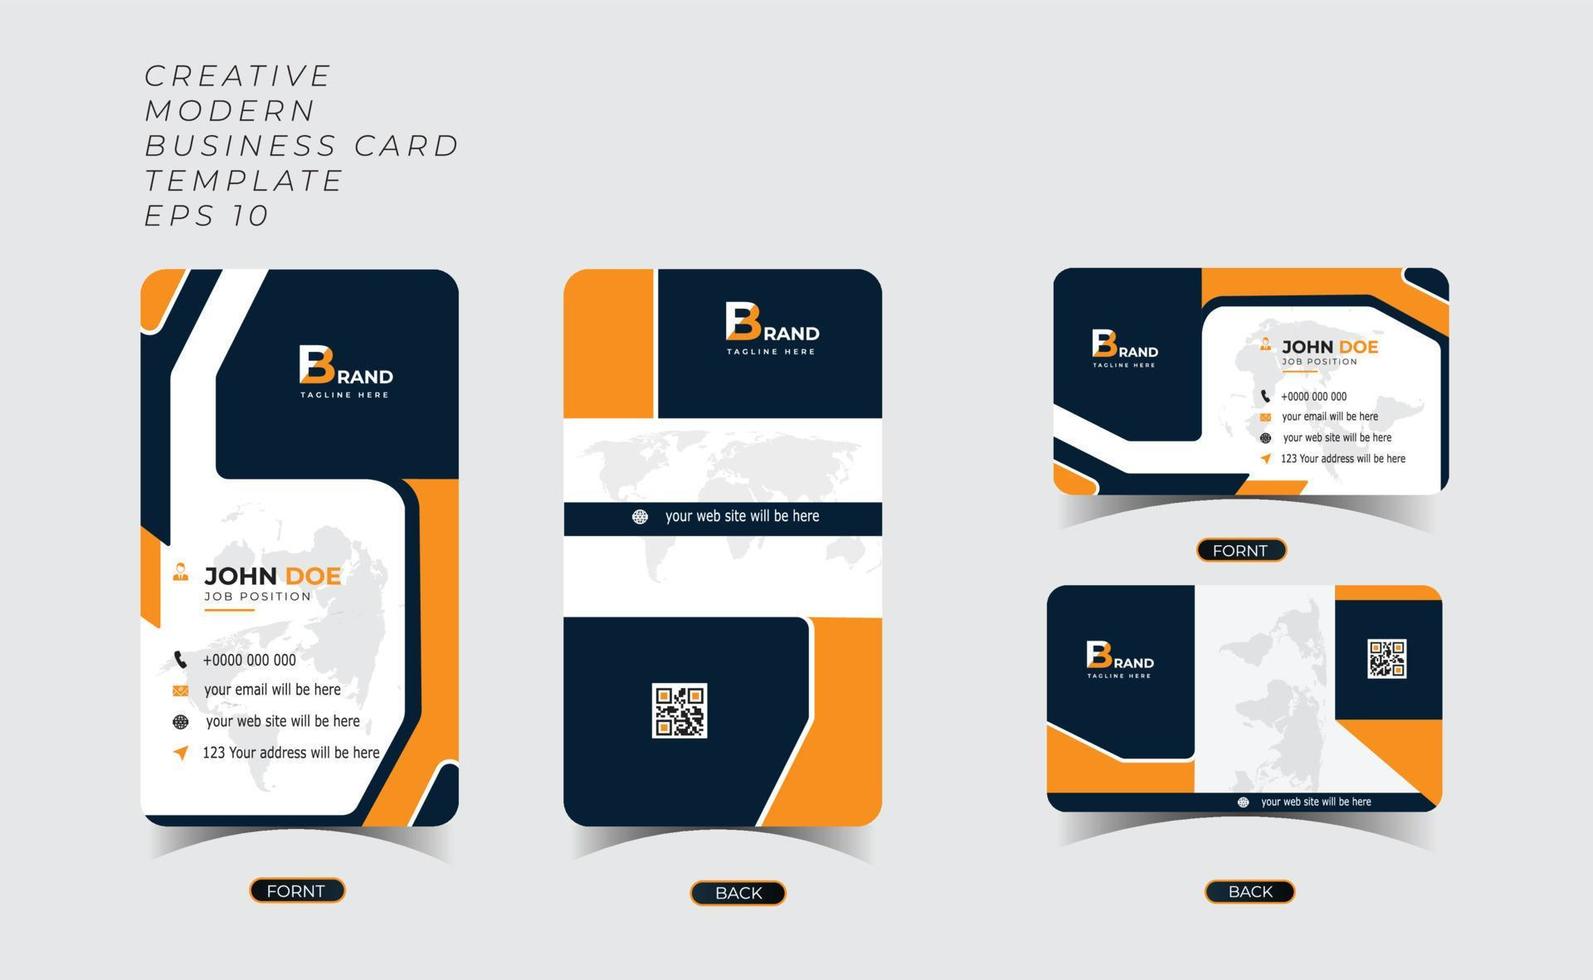 Modern Creative and Clean Business Card Template.   styles card vertical and horizontal layout business card set vector illustration eps 10.